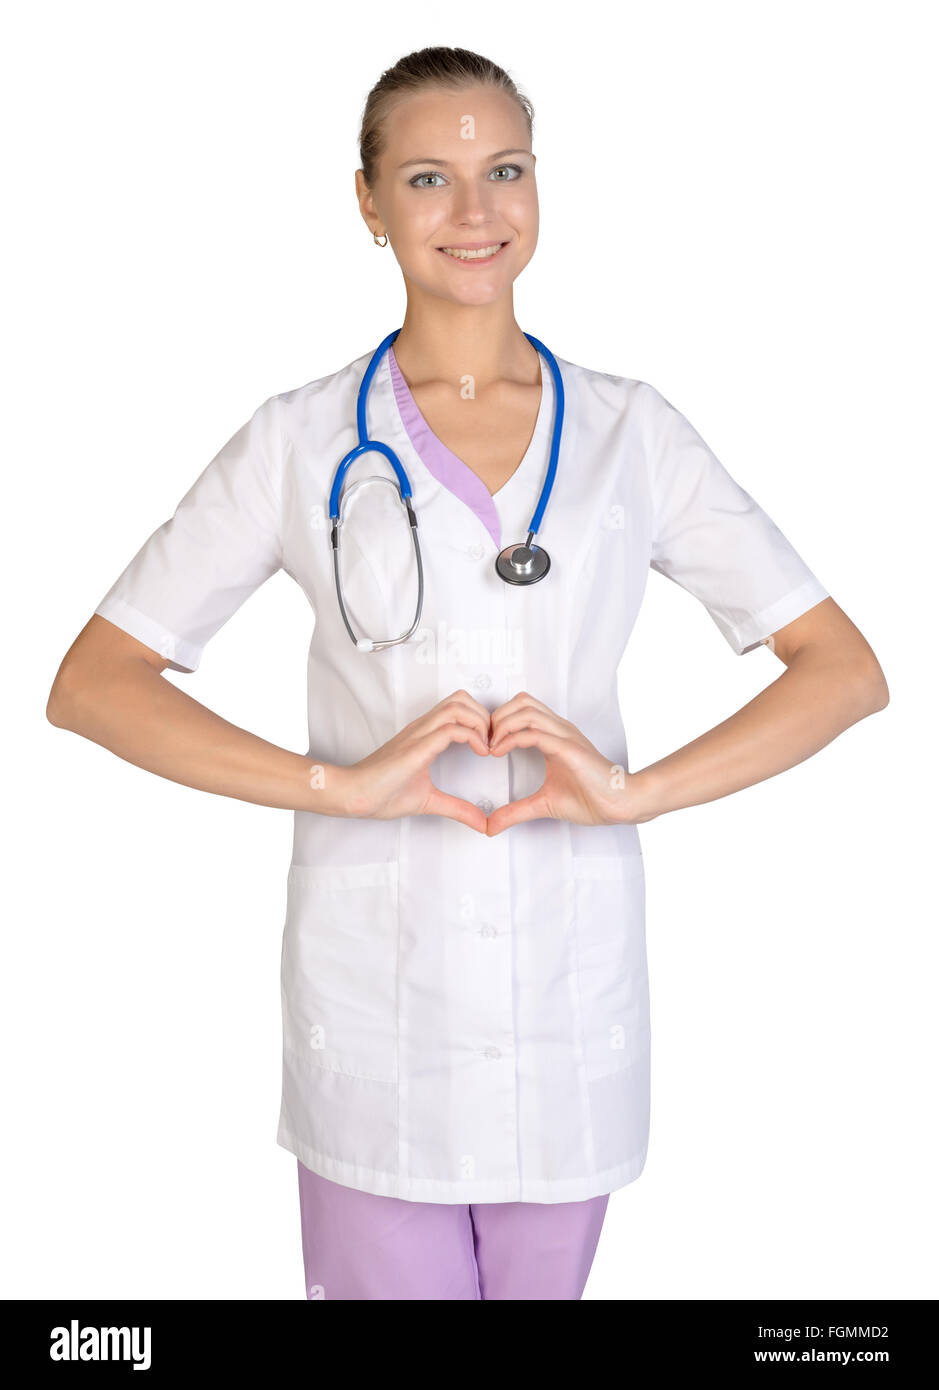 Enthusiastic intern looking at camera shows hand sign heart Stock Photo